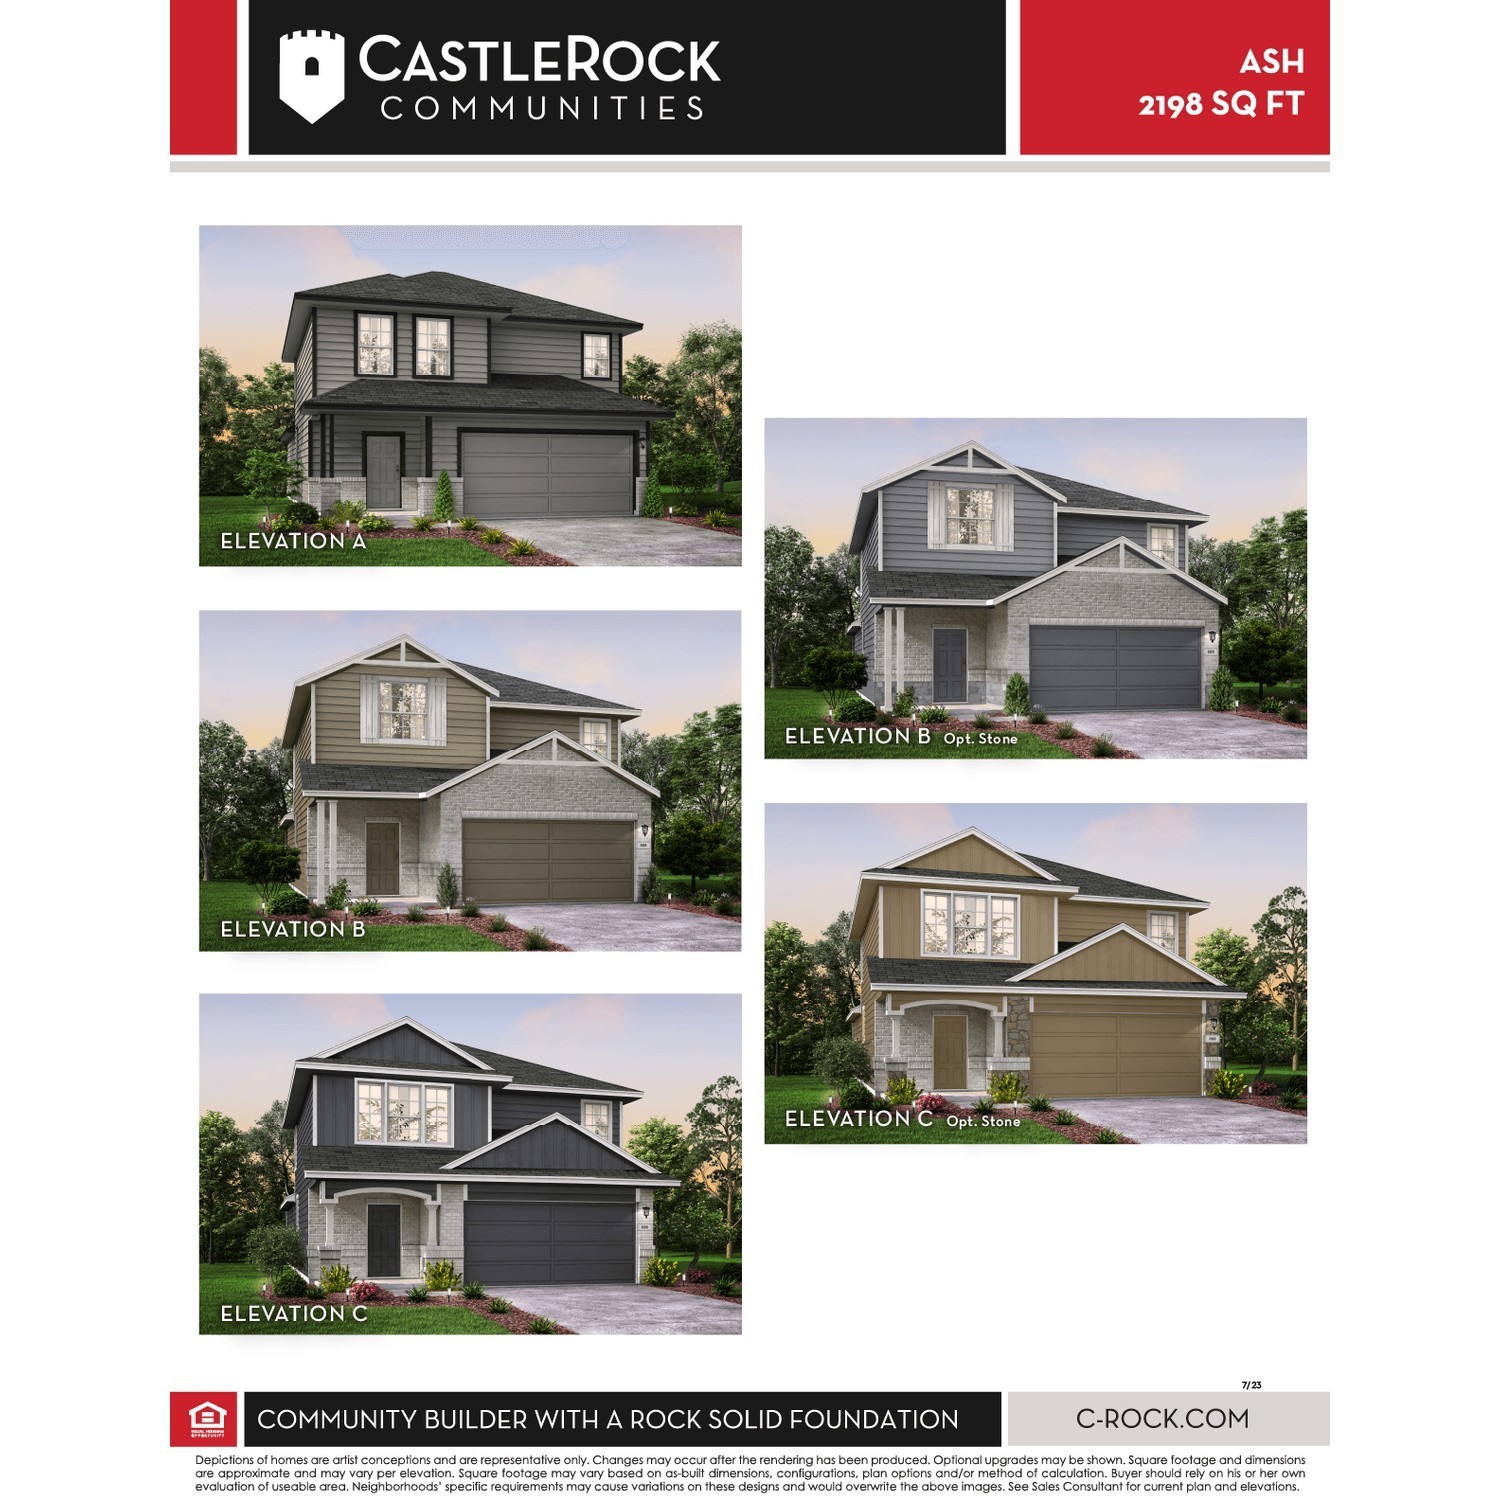 33. Willow View By Castlerock Communities 10403 Salitrillo Bend